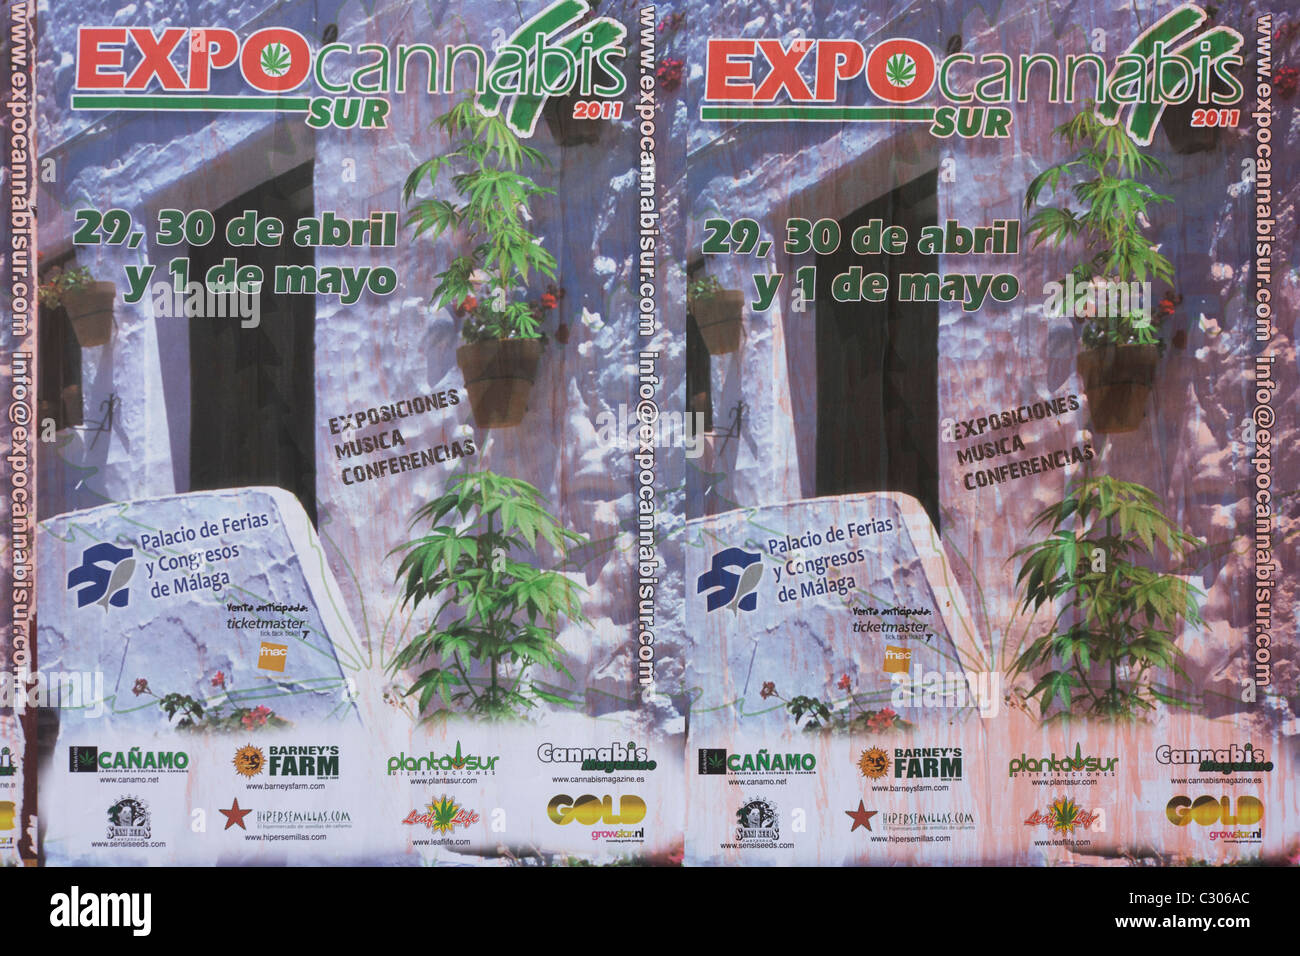 Poster advertising a symposium on Cannabis in the city of Granada, Spain. Stock Photo